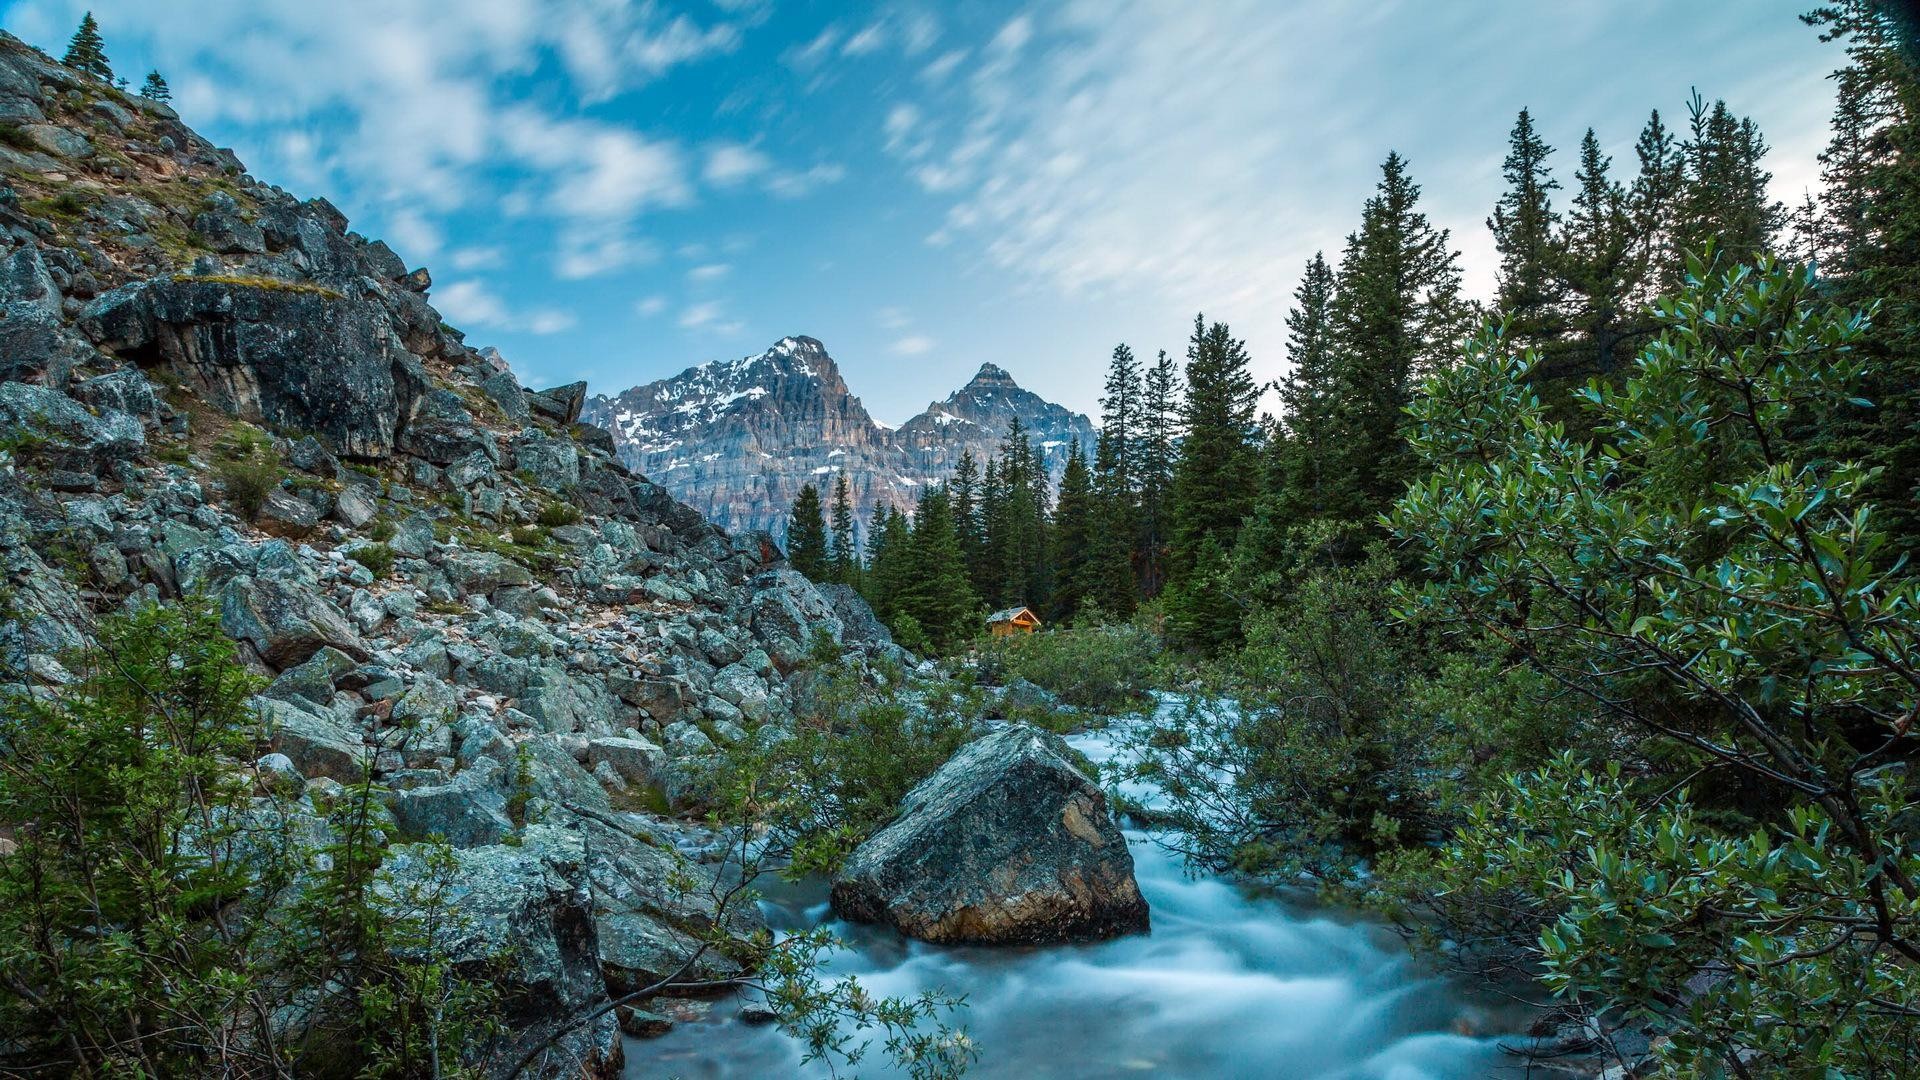 Rivers: Rocky Mountain Stream Flowing Mountains Trees Cabin Rocks ...